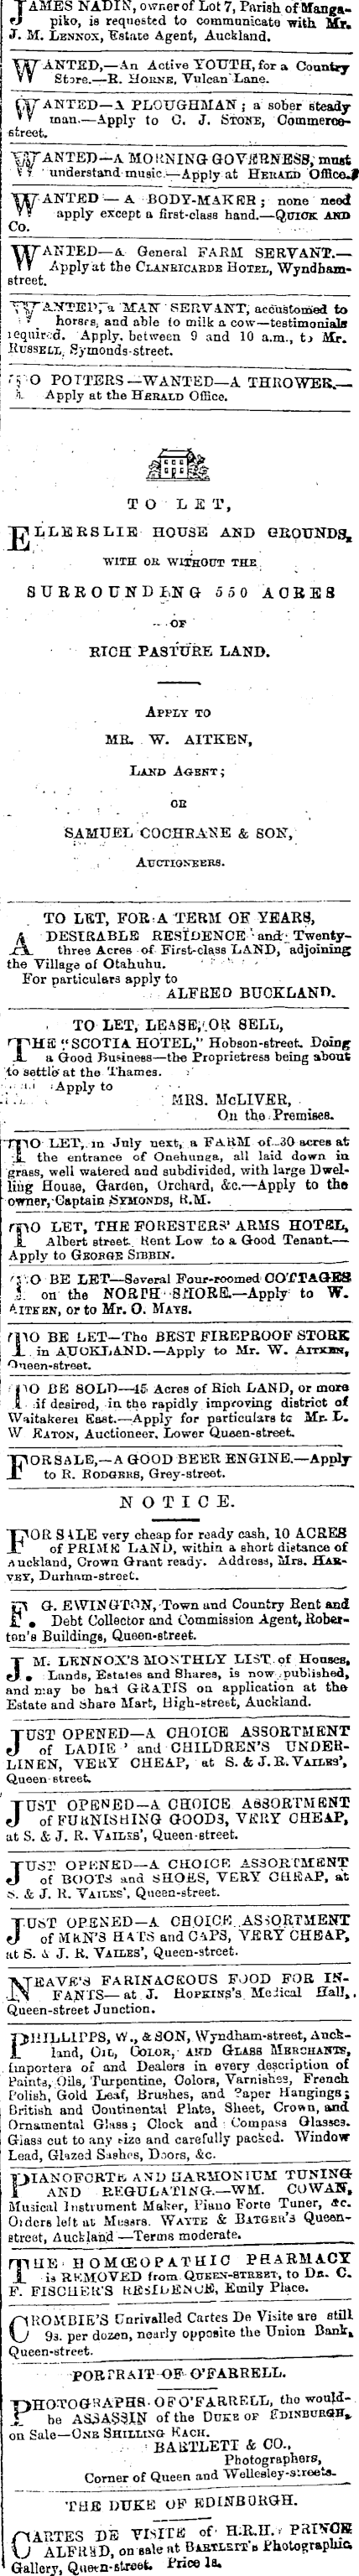 Papers Past Newspapers New Zealand Herald 6 May 1868 Page 1 Advertisements Column 6